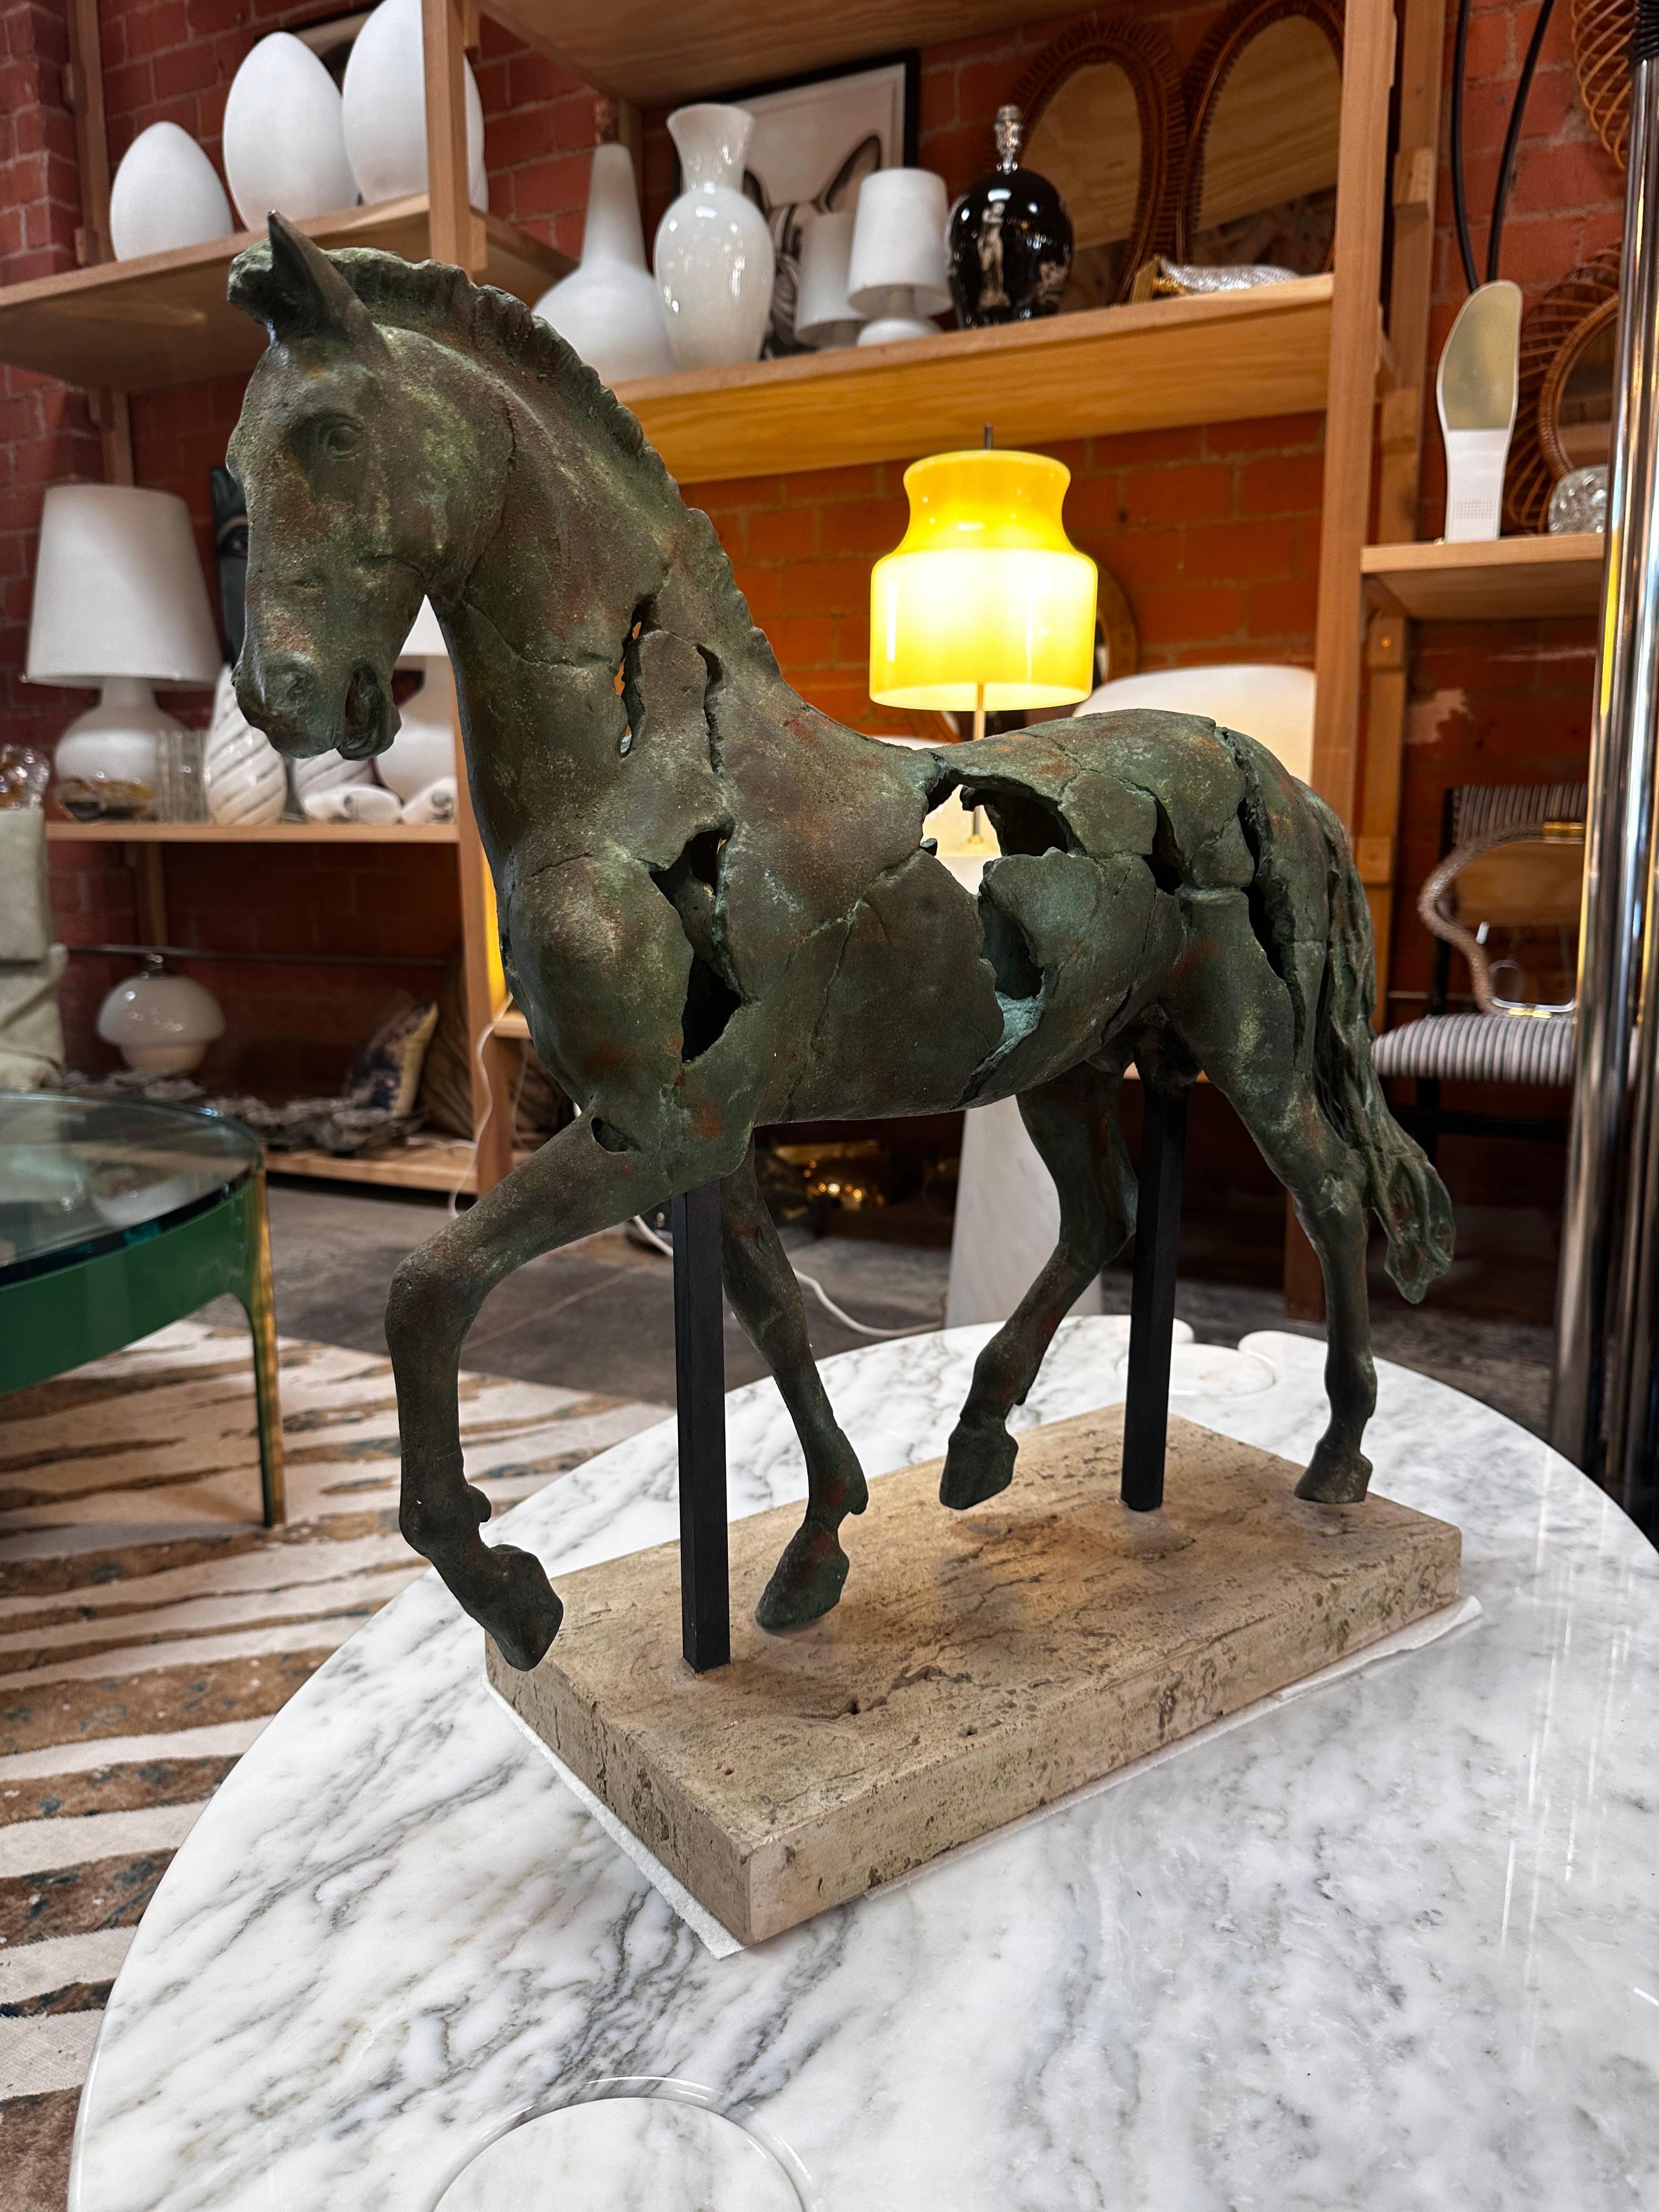 The Vintage Italian Bronze Horse Sculpture from the 1960s is a handmade masterpiece crafted in Italy. This exquisite sculpture features a horse made of bronze metal, elegantly positioned on a rectangular travertine base, showcasing both artistry and